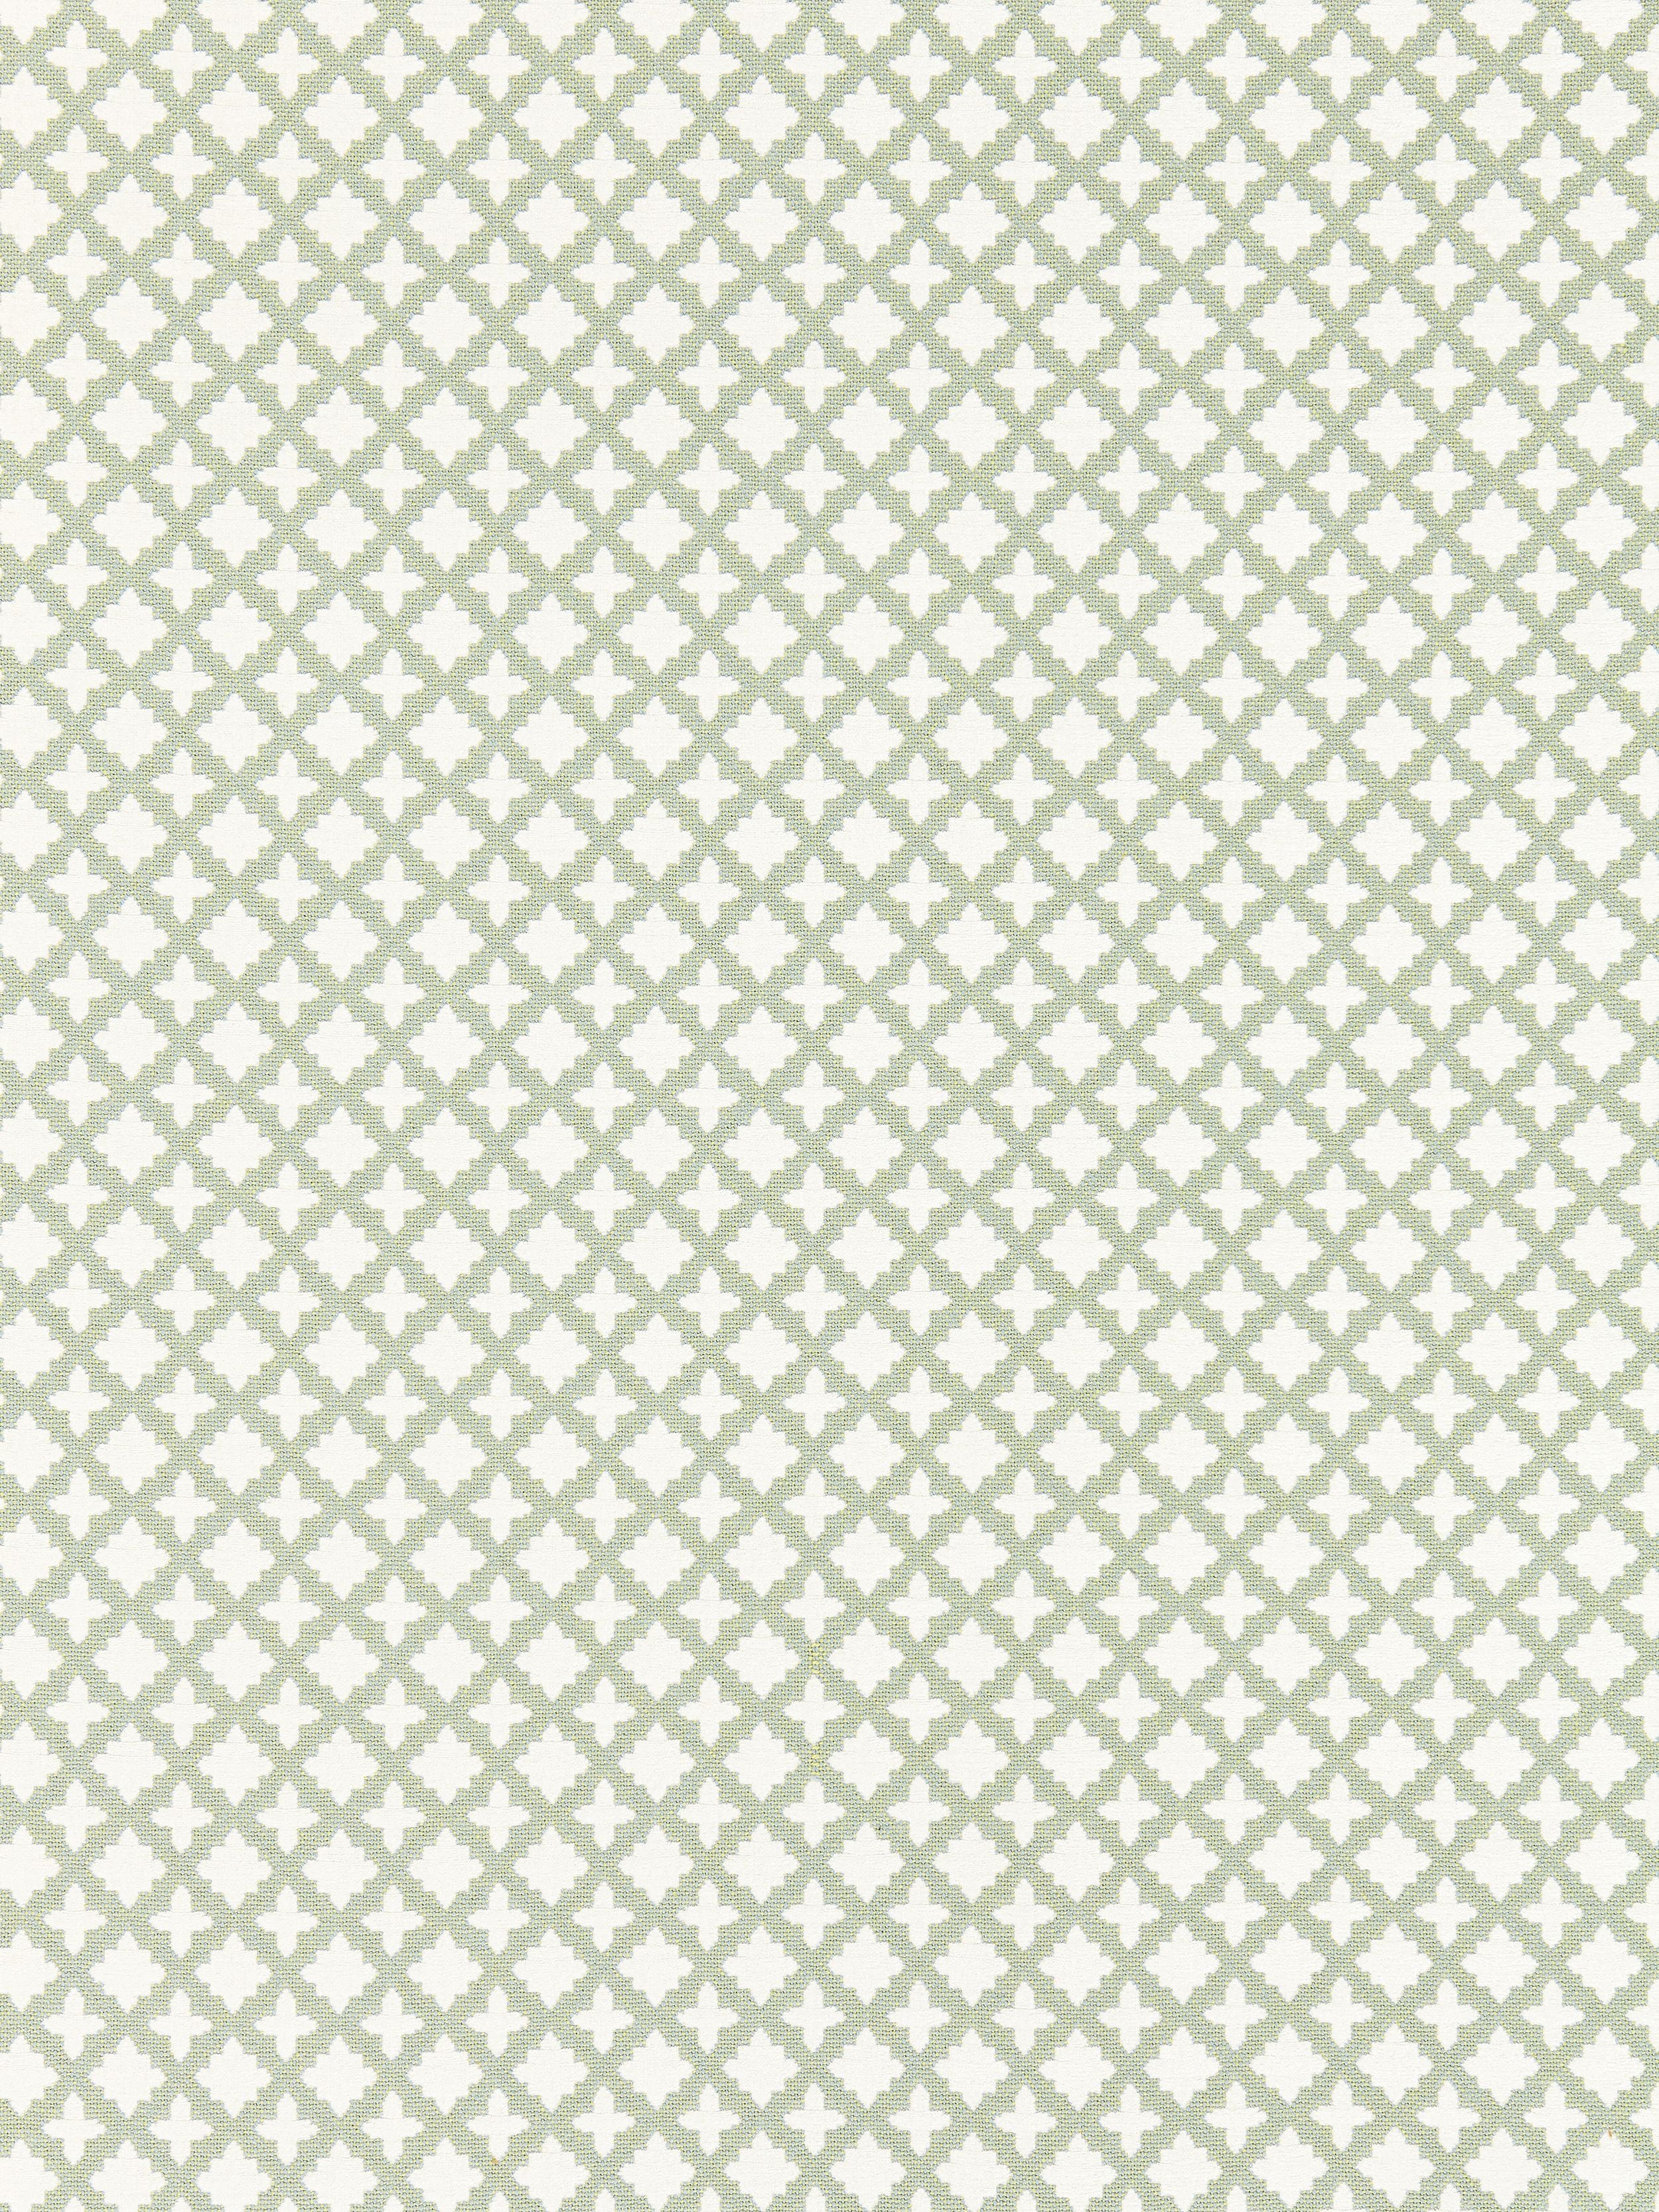 Marrakesh Weave fabric in aquamarine color - pattern number SC 000127034 - by Scalamandre in the Scalamandre Fabrics Book 1 collection